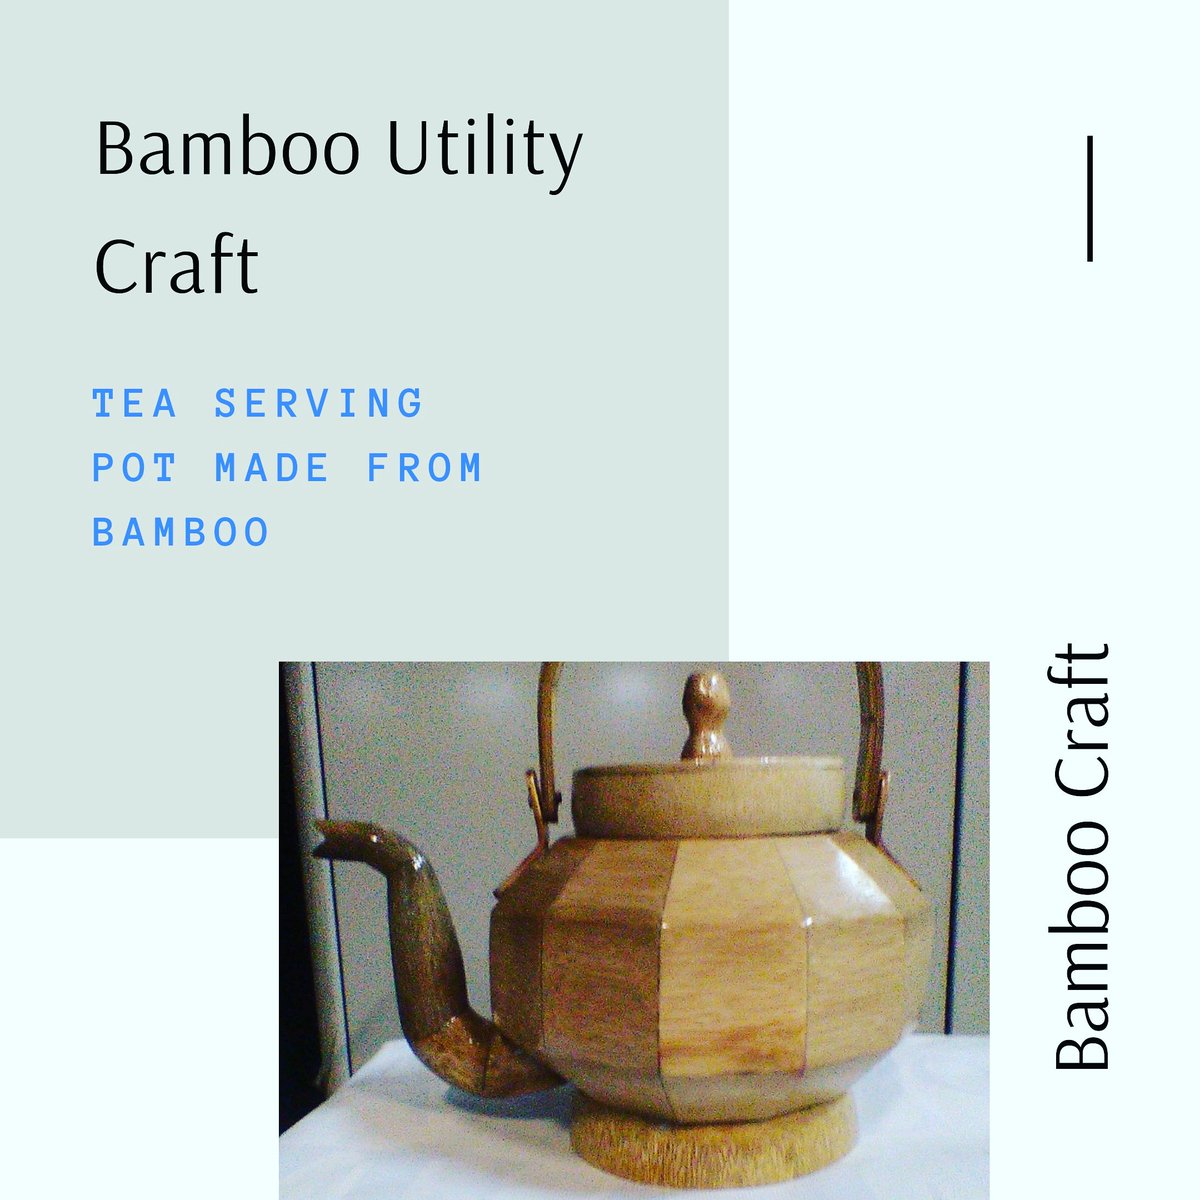 Tea serving pot handcrafted from Bamboo, the Eco friendly way.

#tea #bamboocraft #ecofriendly #enviroment